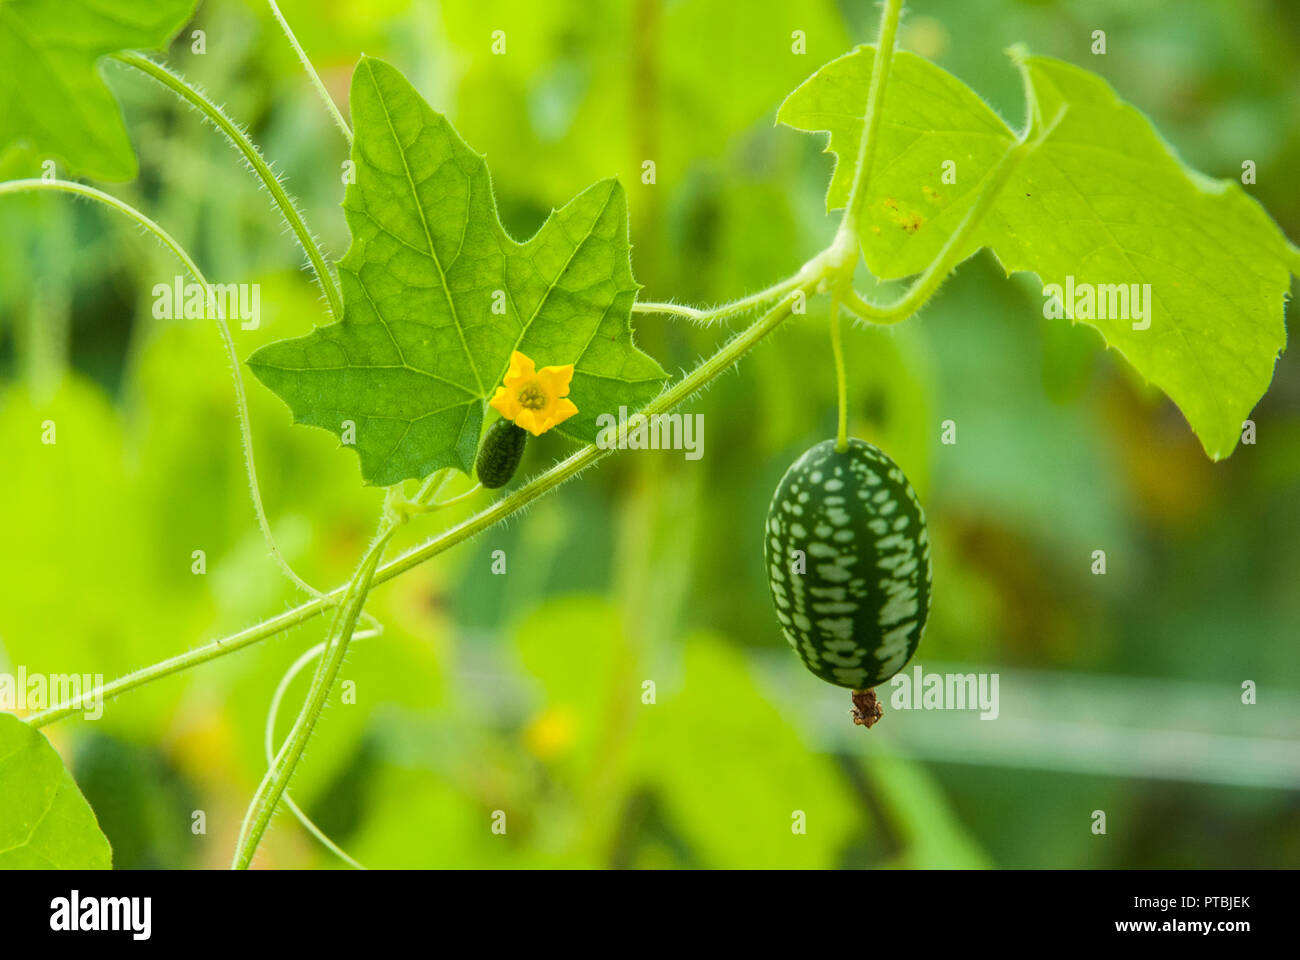 Tiny green cucamelons (melothriascabra) growing on vines with tiny yellow flowers in summer. Stock Photo